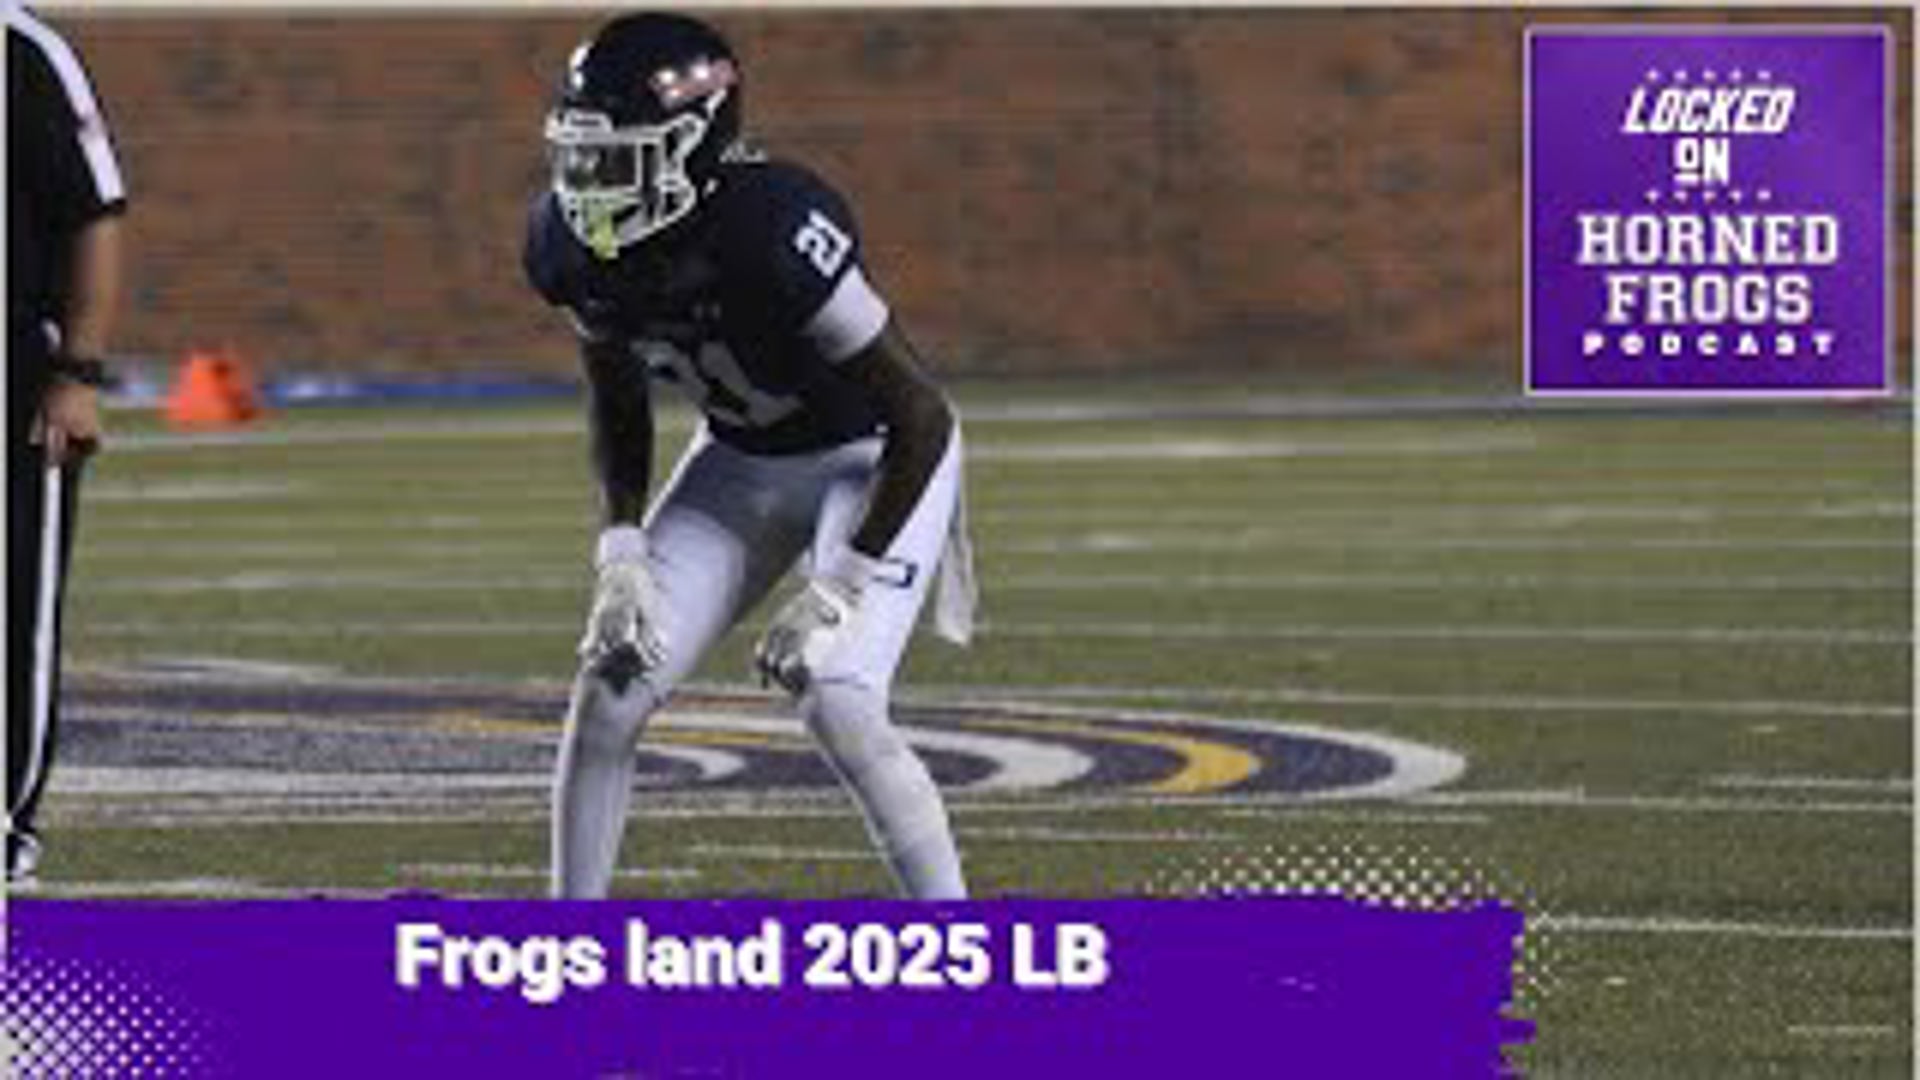 Sonny Dykes stays hot on the recruiting trail. Frogs land 2025 Denton Ryan LB.